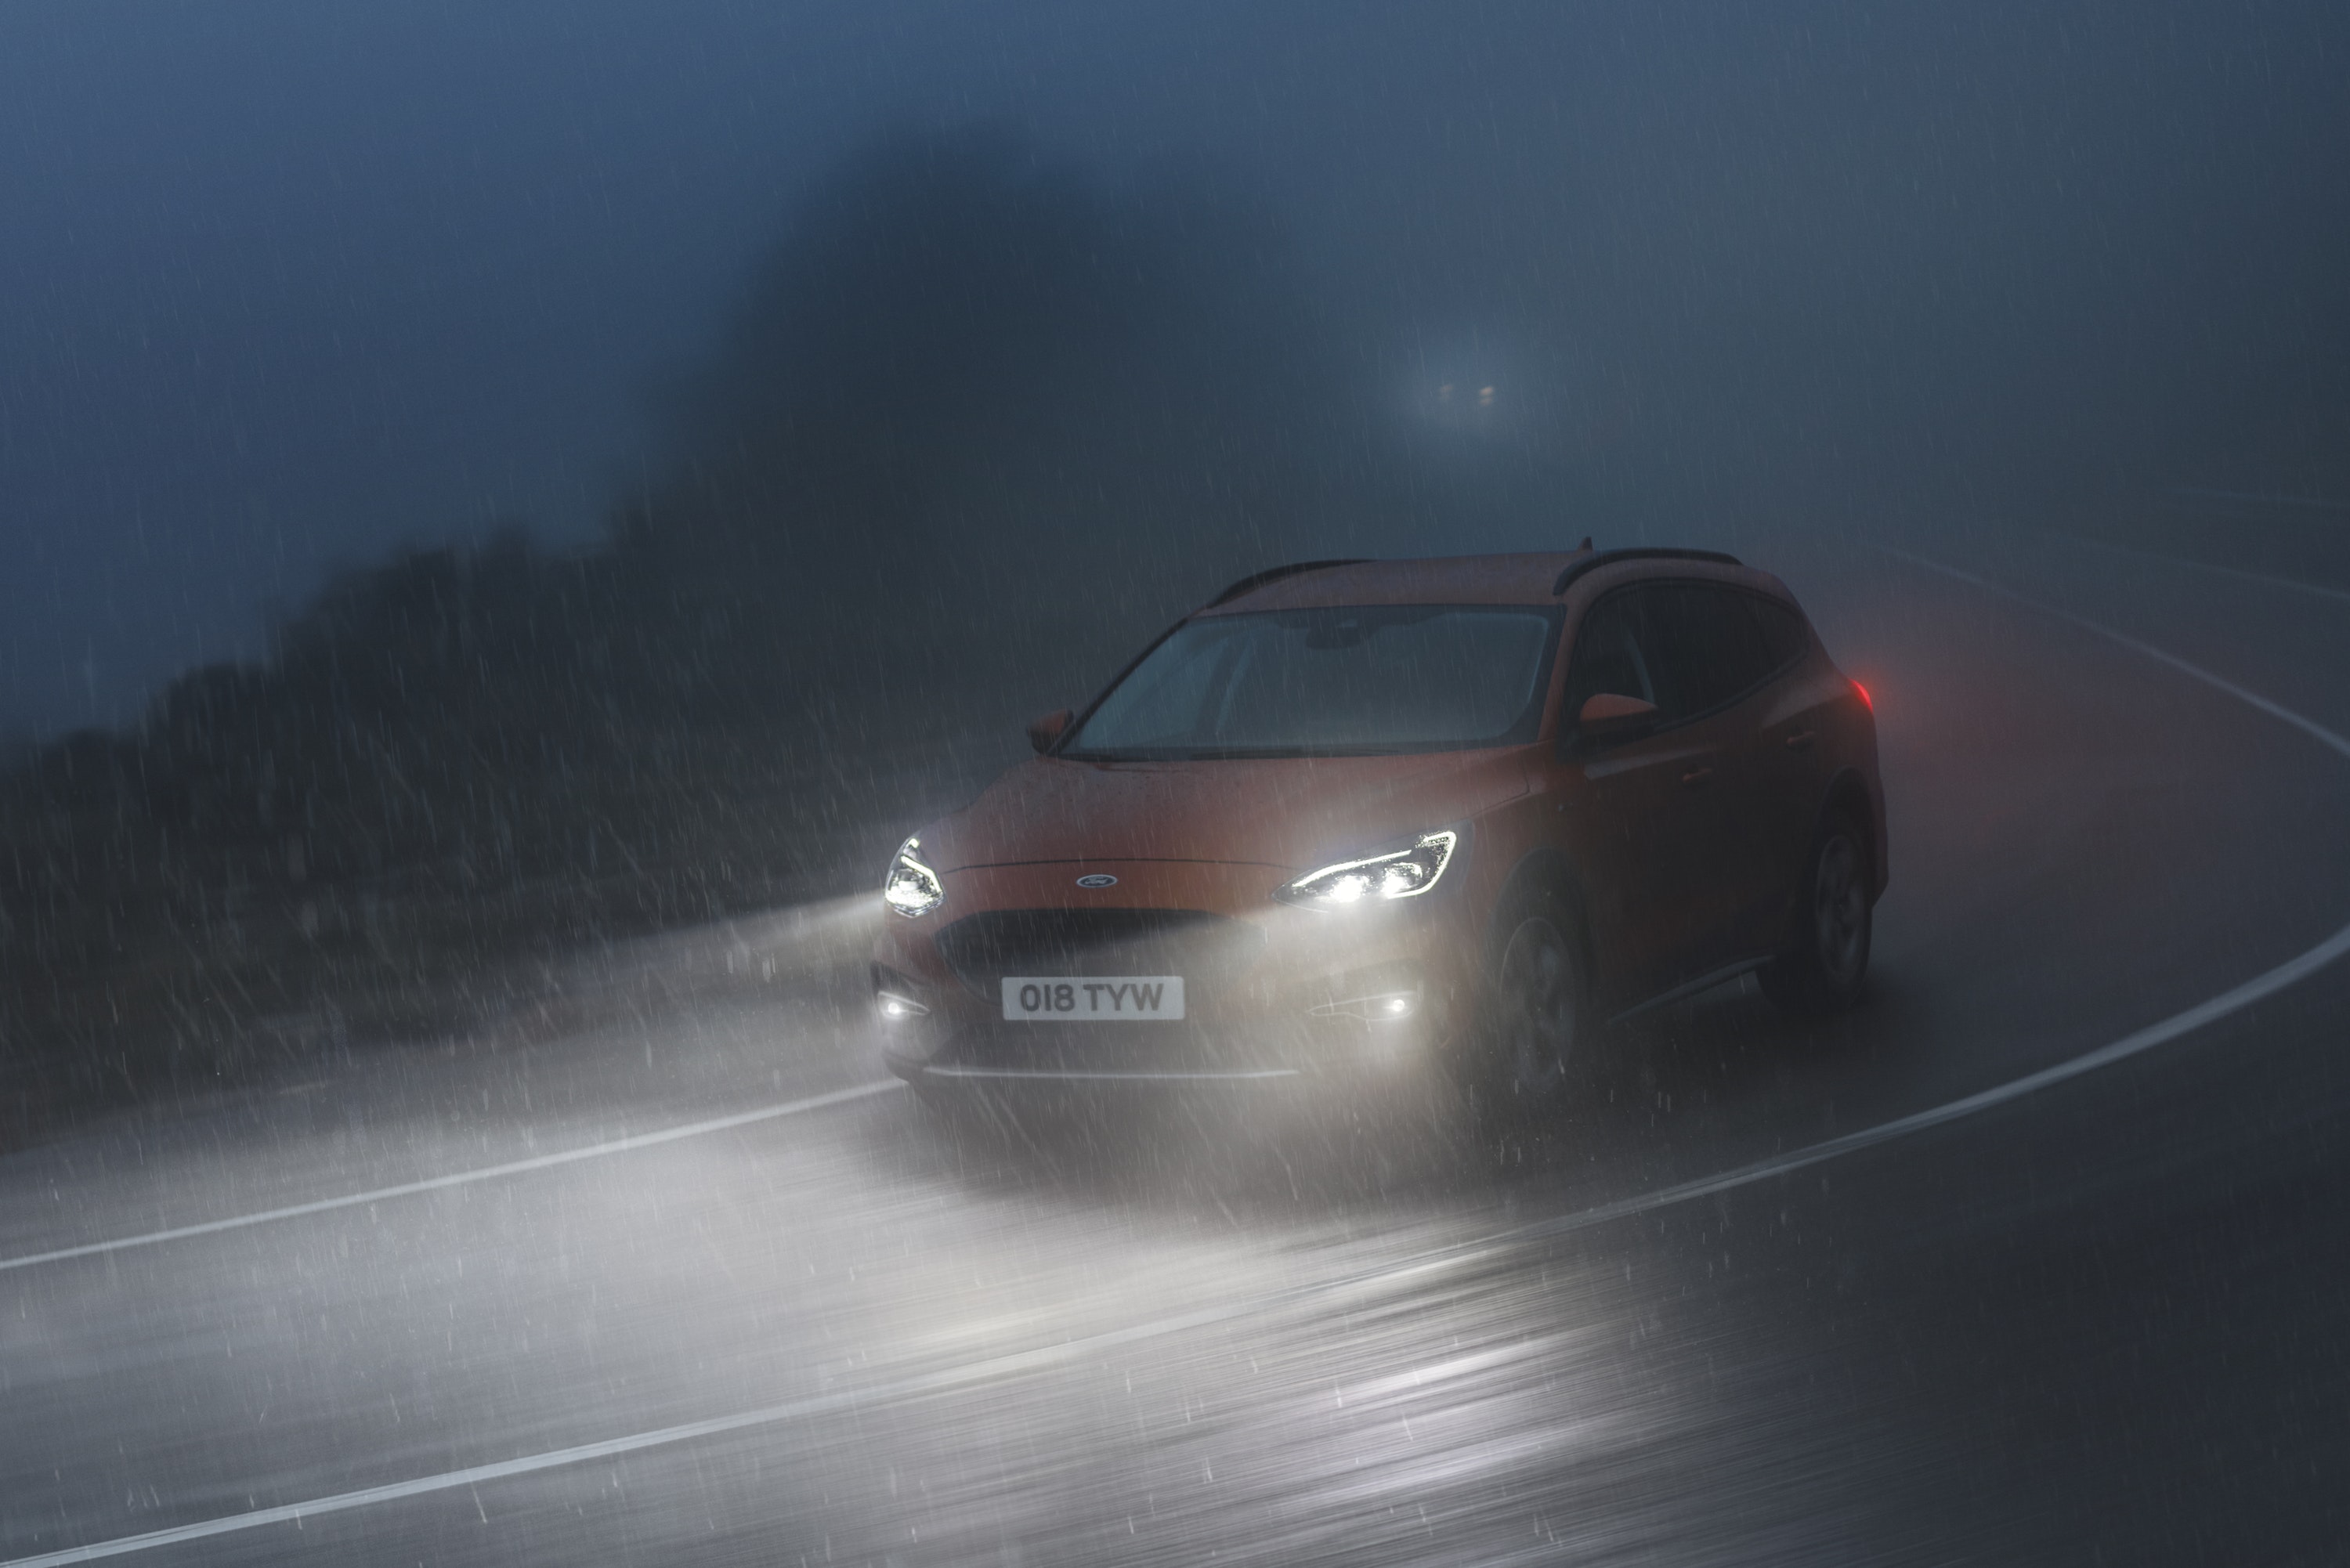 Ford Focus active driving in dark and rain.jpg